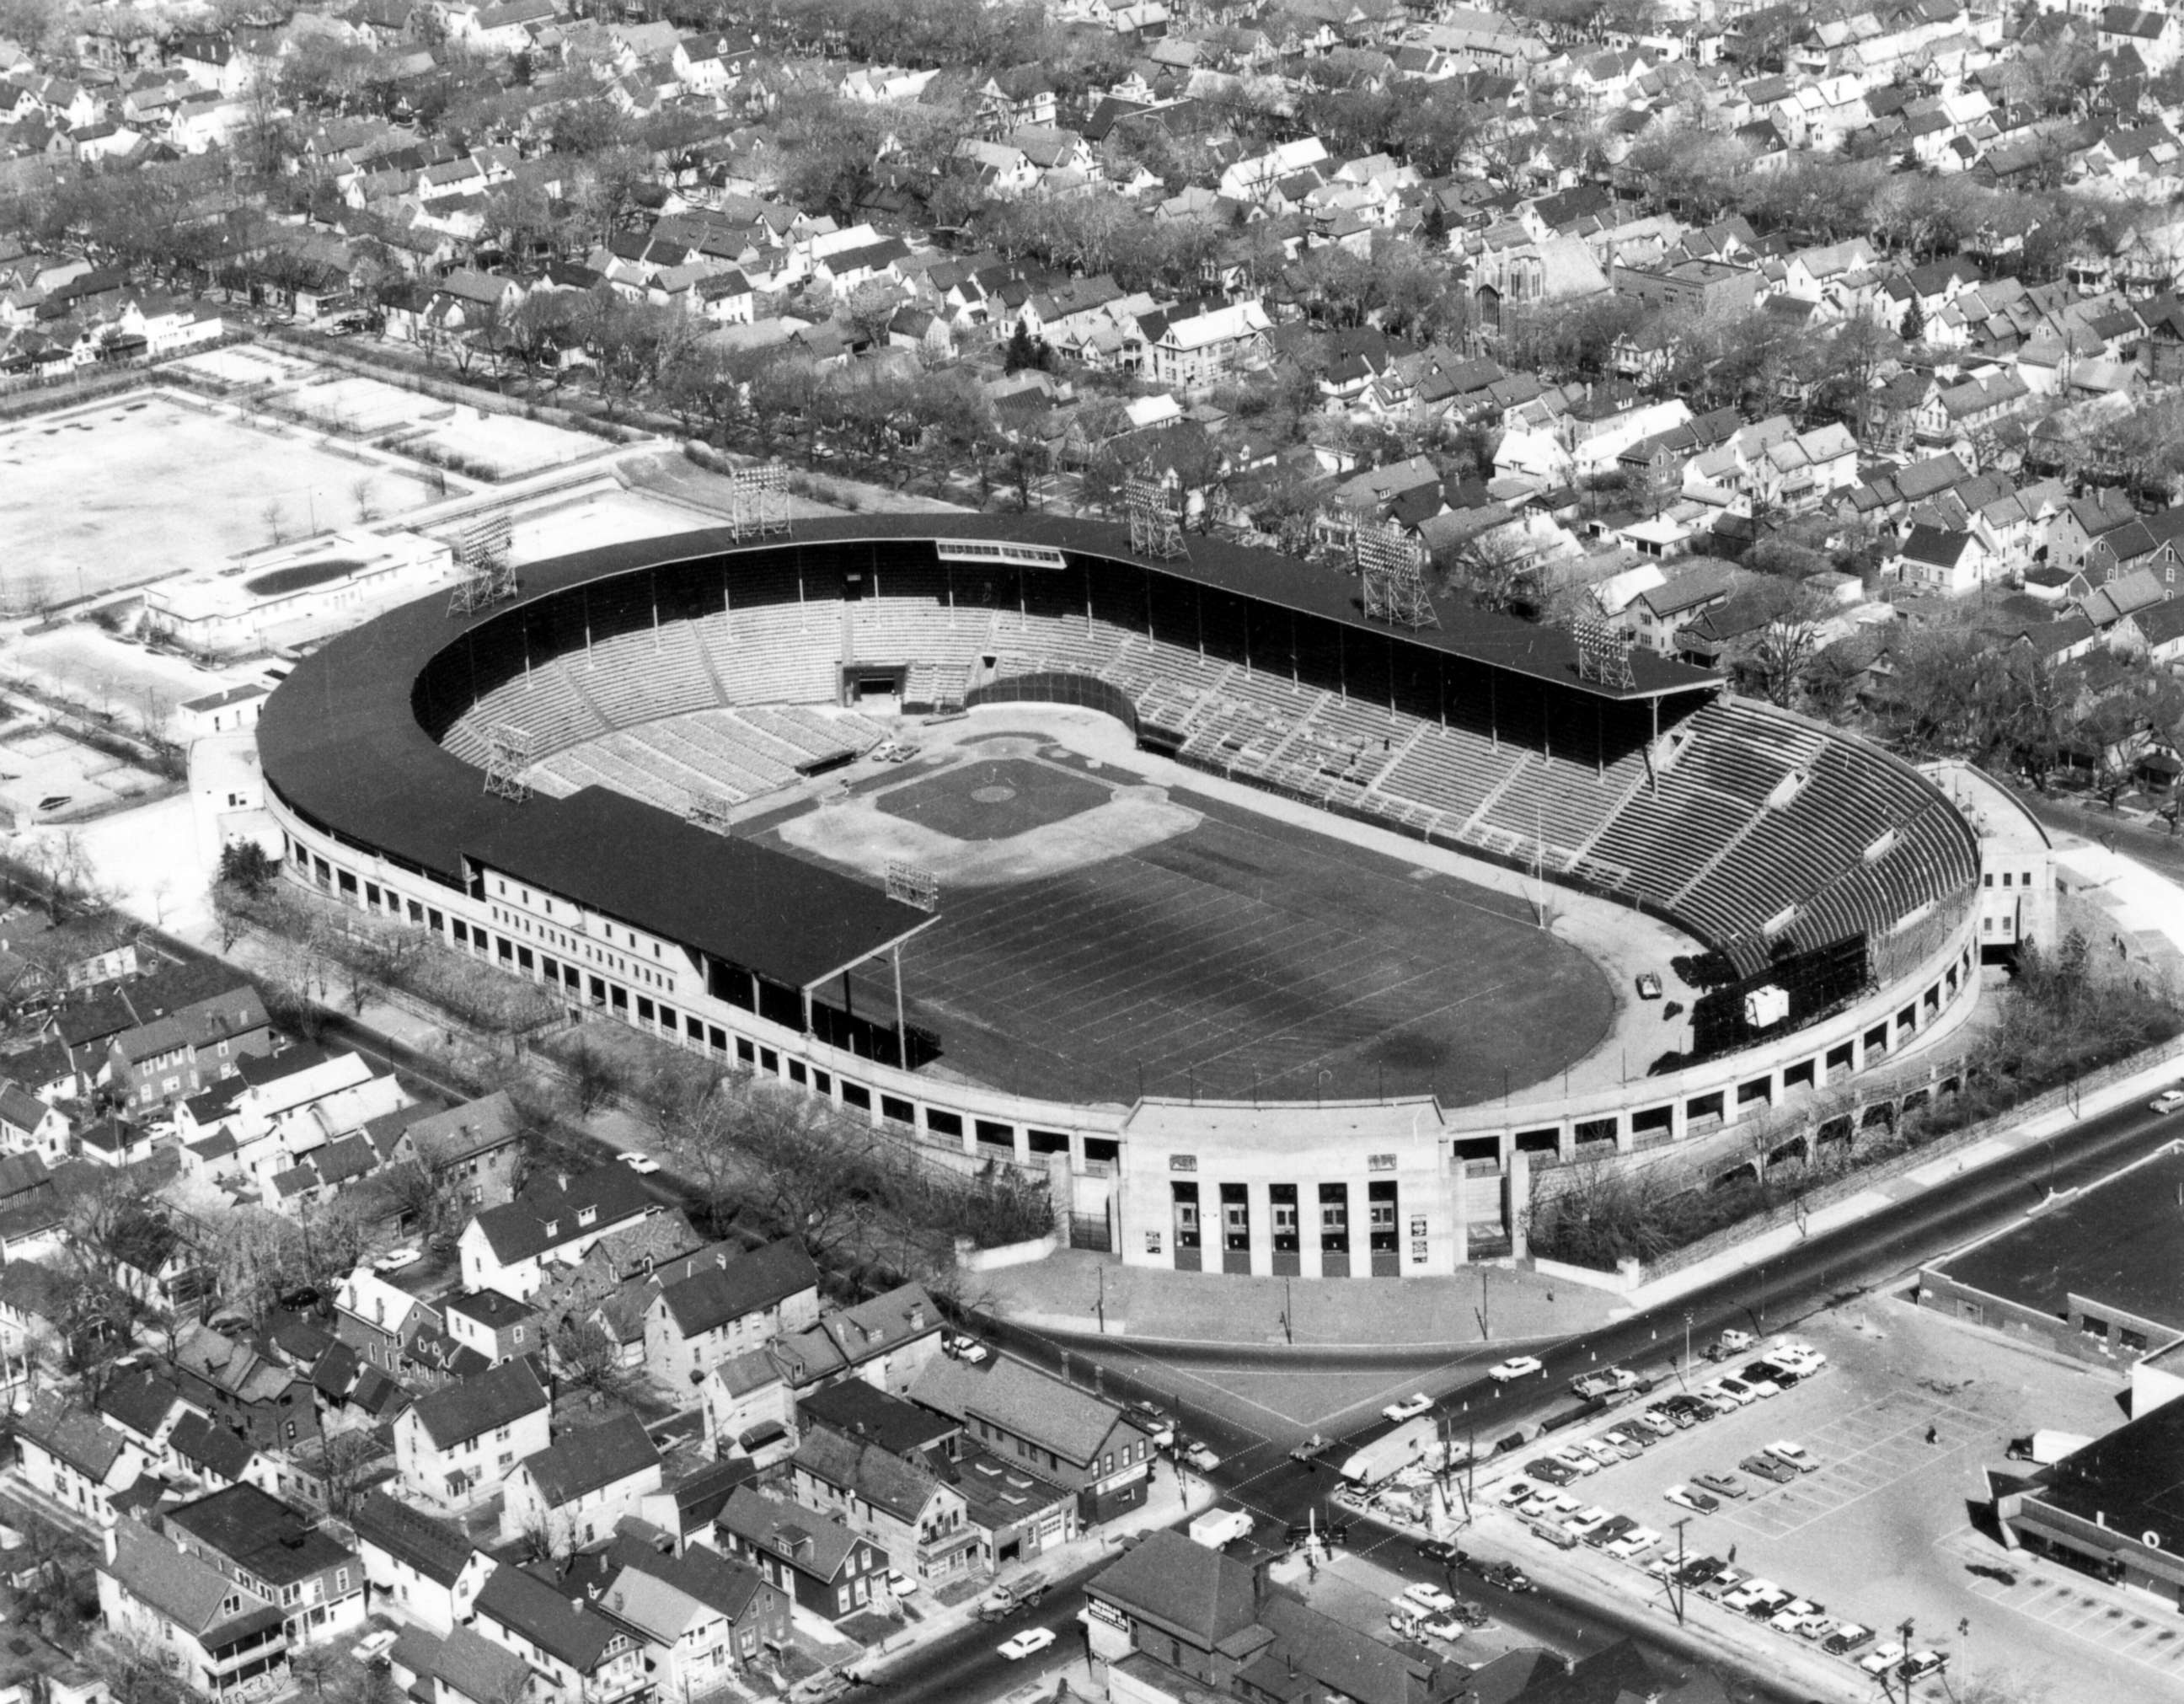 PHOTO: Aerial view of War Memorial Stadium at the corner of Jefferson and Best, in Buffalo, New York.